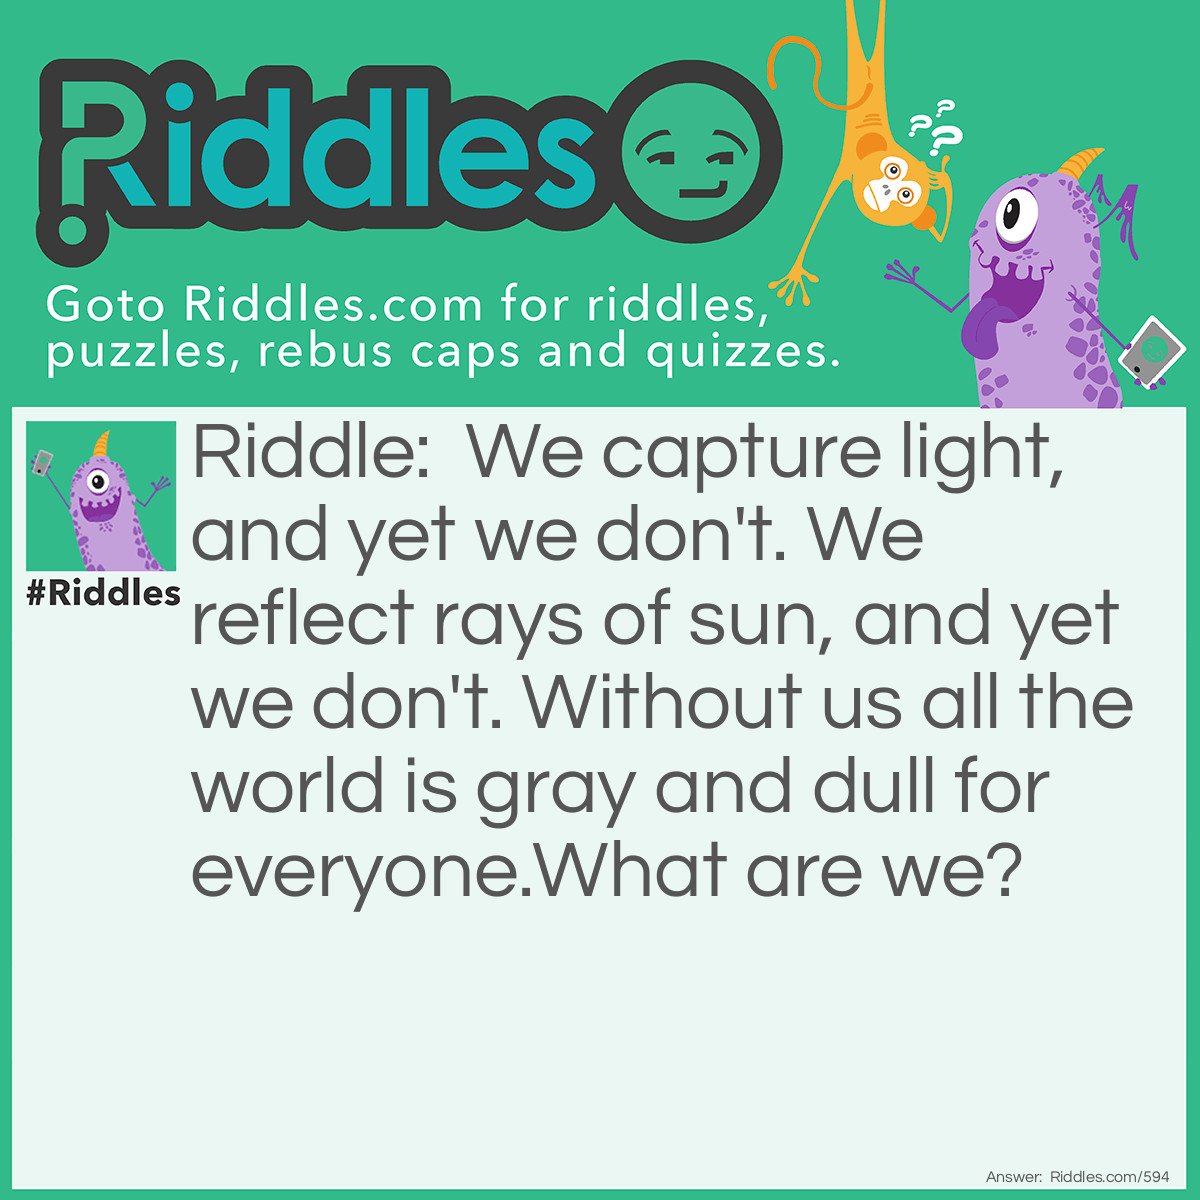 Riddle: We capture light, and yet we don't. We reflect rays of sun, and yet we don't. Without us all the world is gray and dull for everyone.
What are we? Answer: Colors.